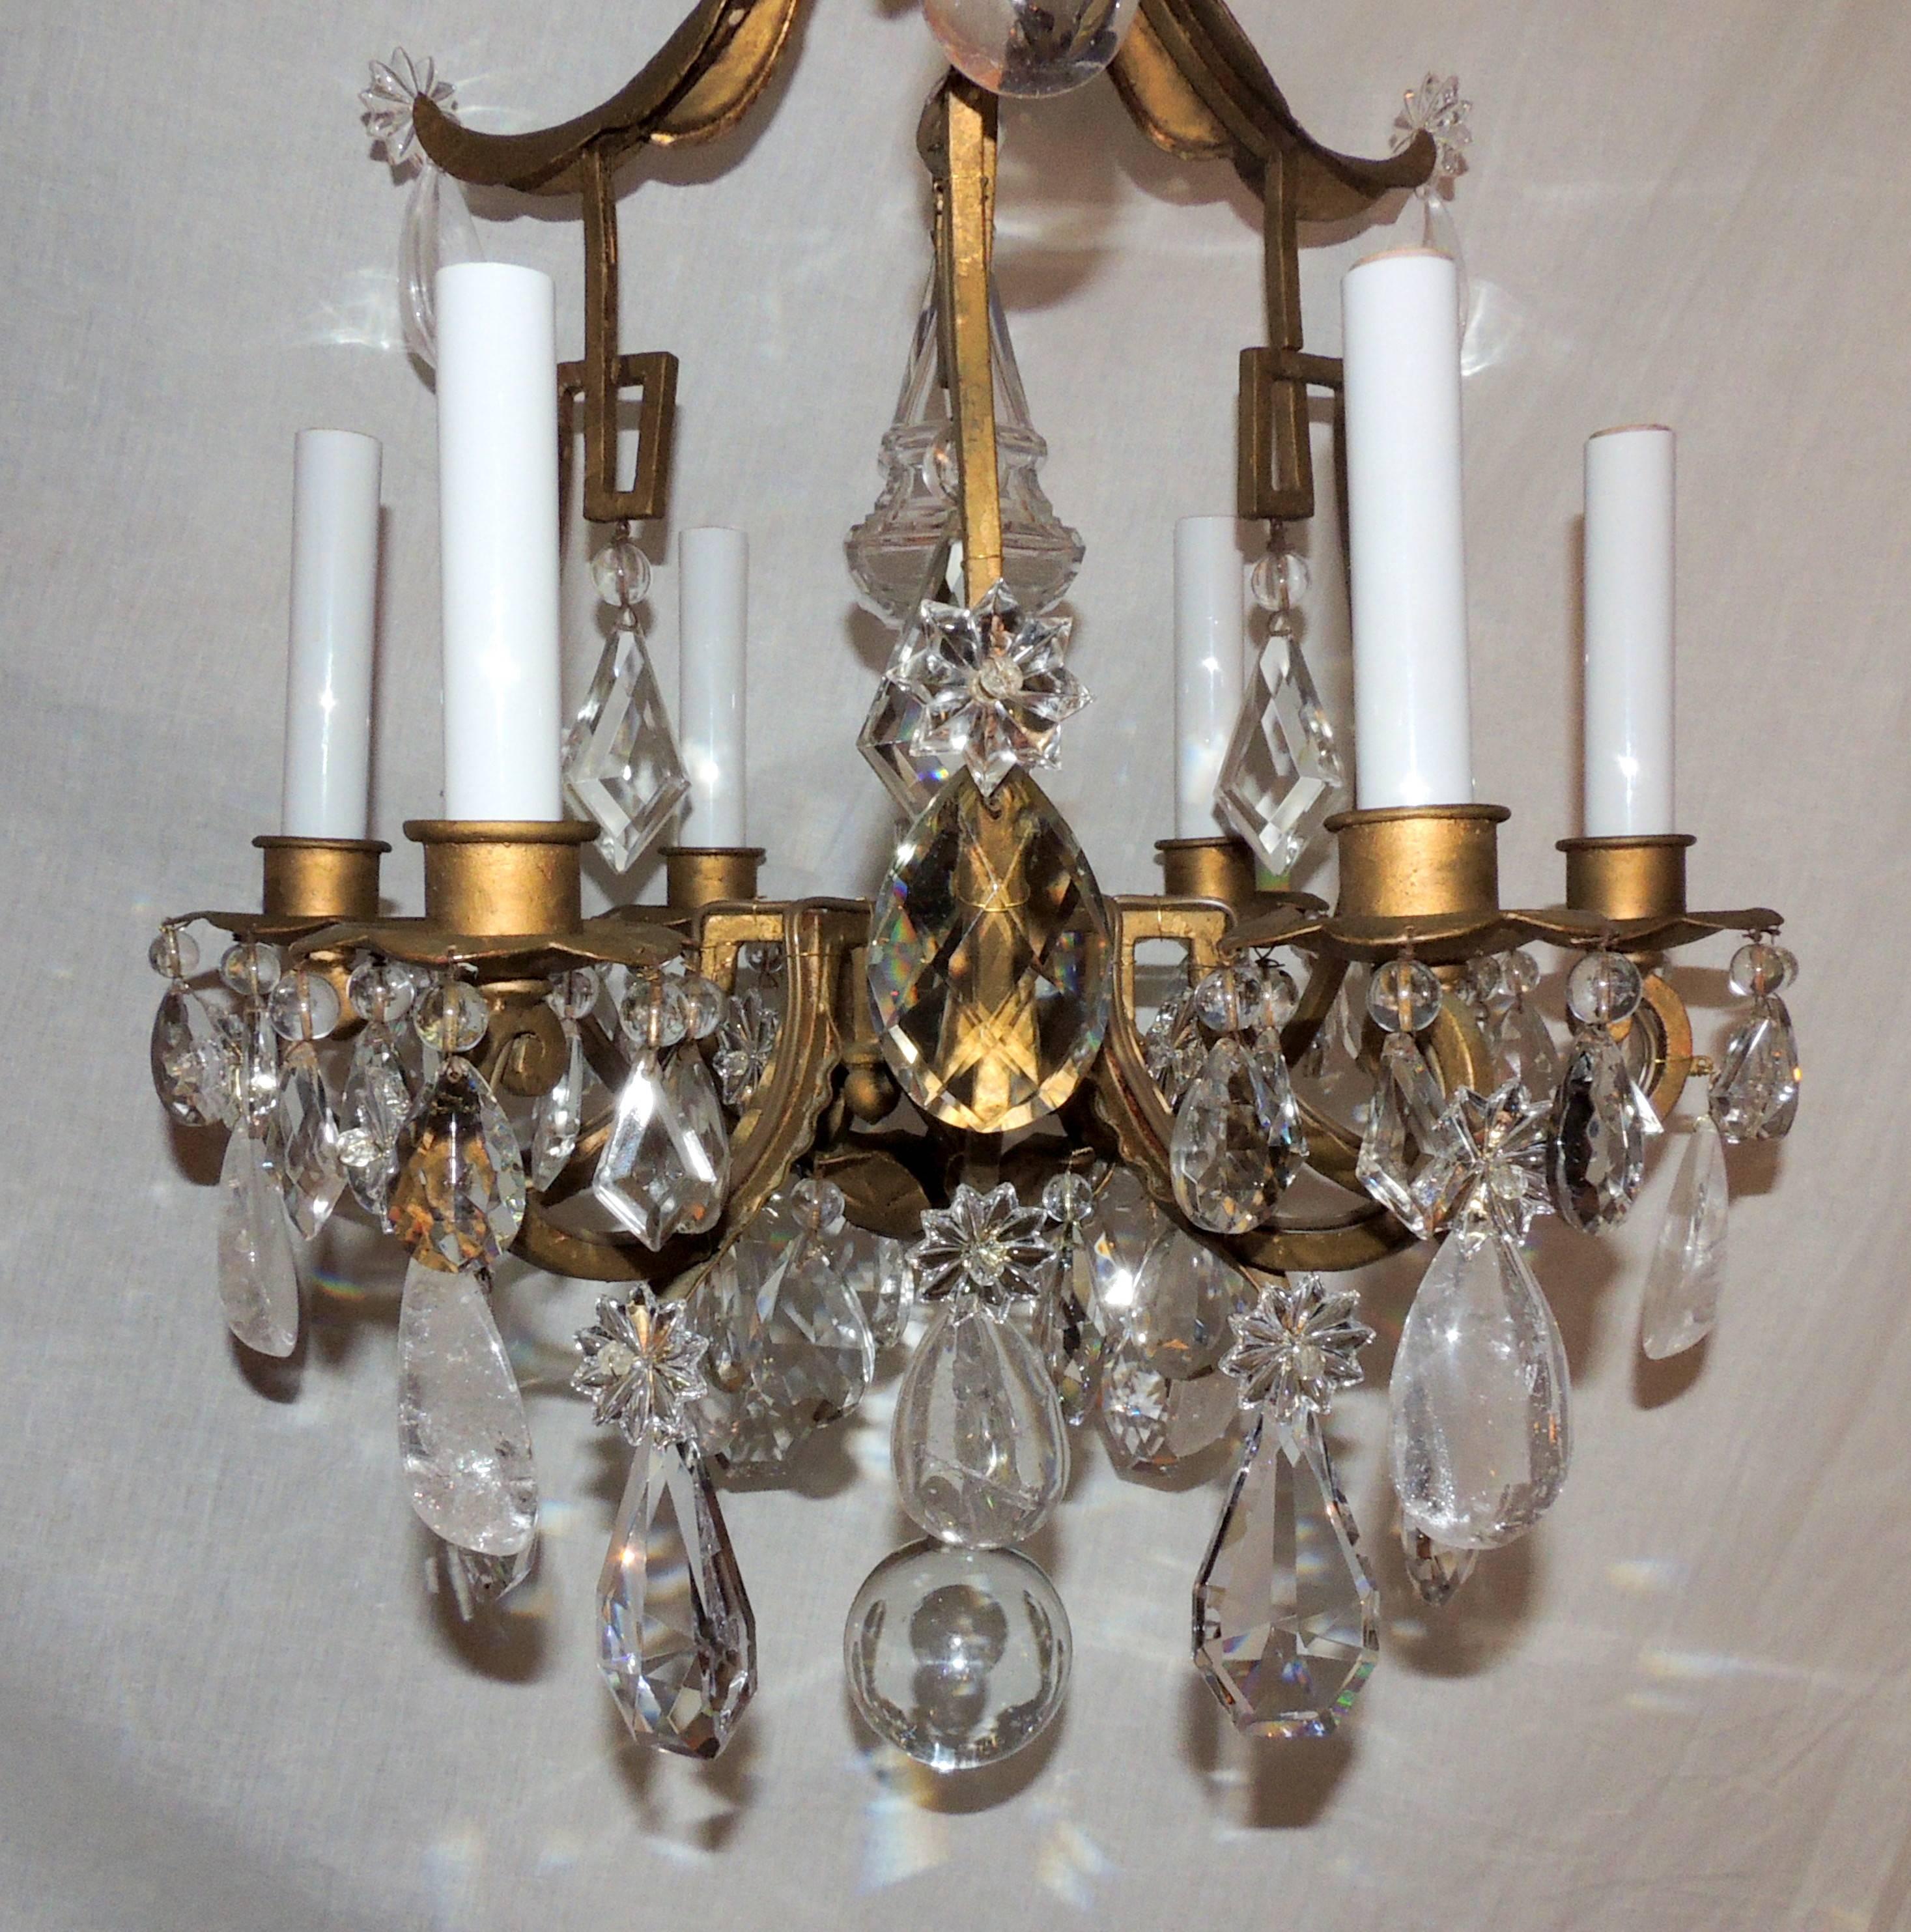 Wonderful French Pagoda Gilt Rock Crystal Bagues Chandelier Six-Light Fixture In Good Condition For Sale In Roslyn, NY